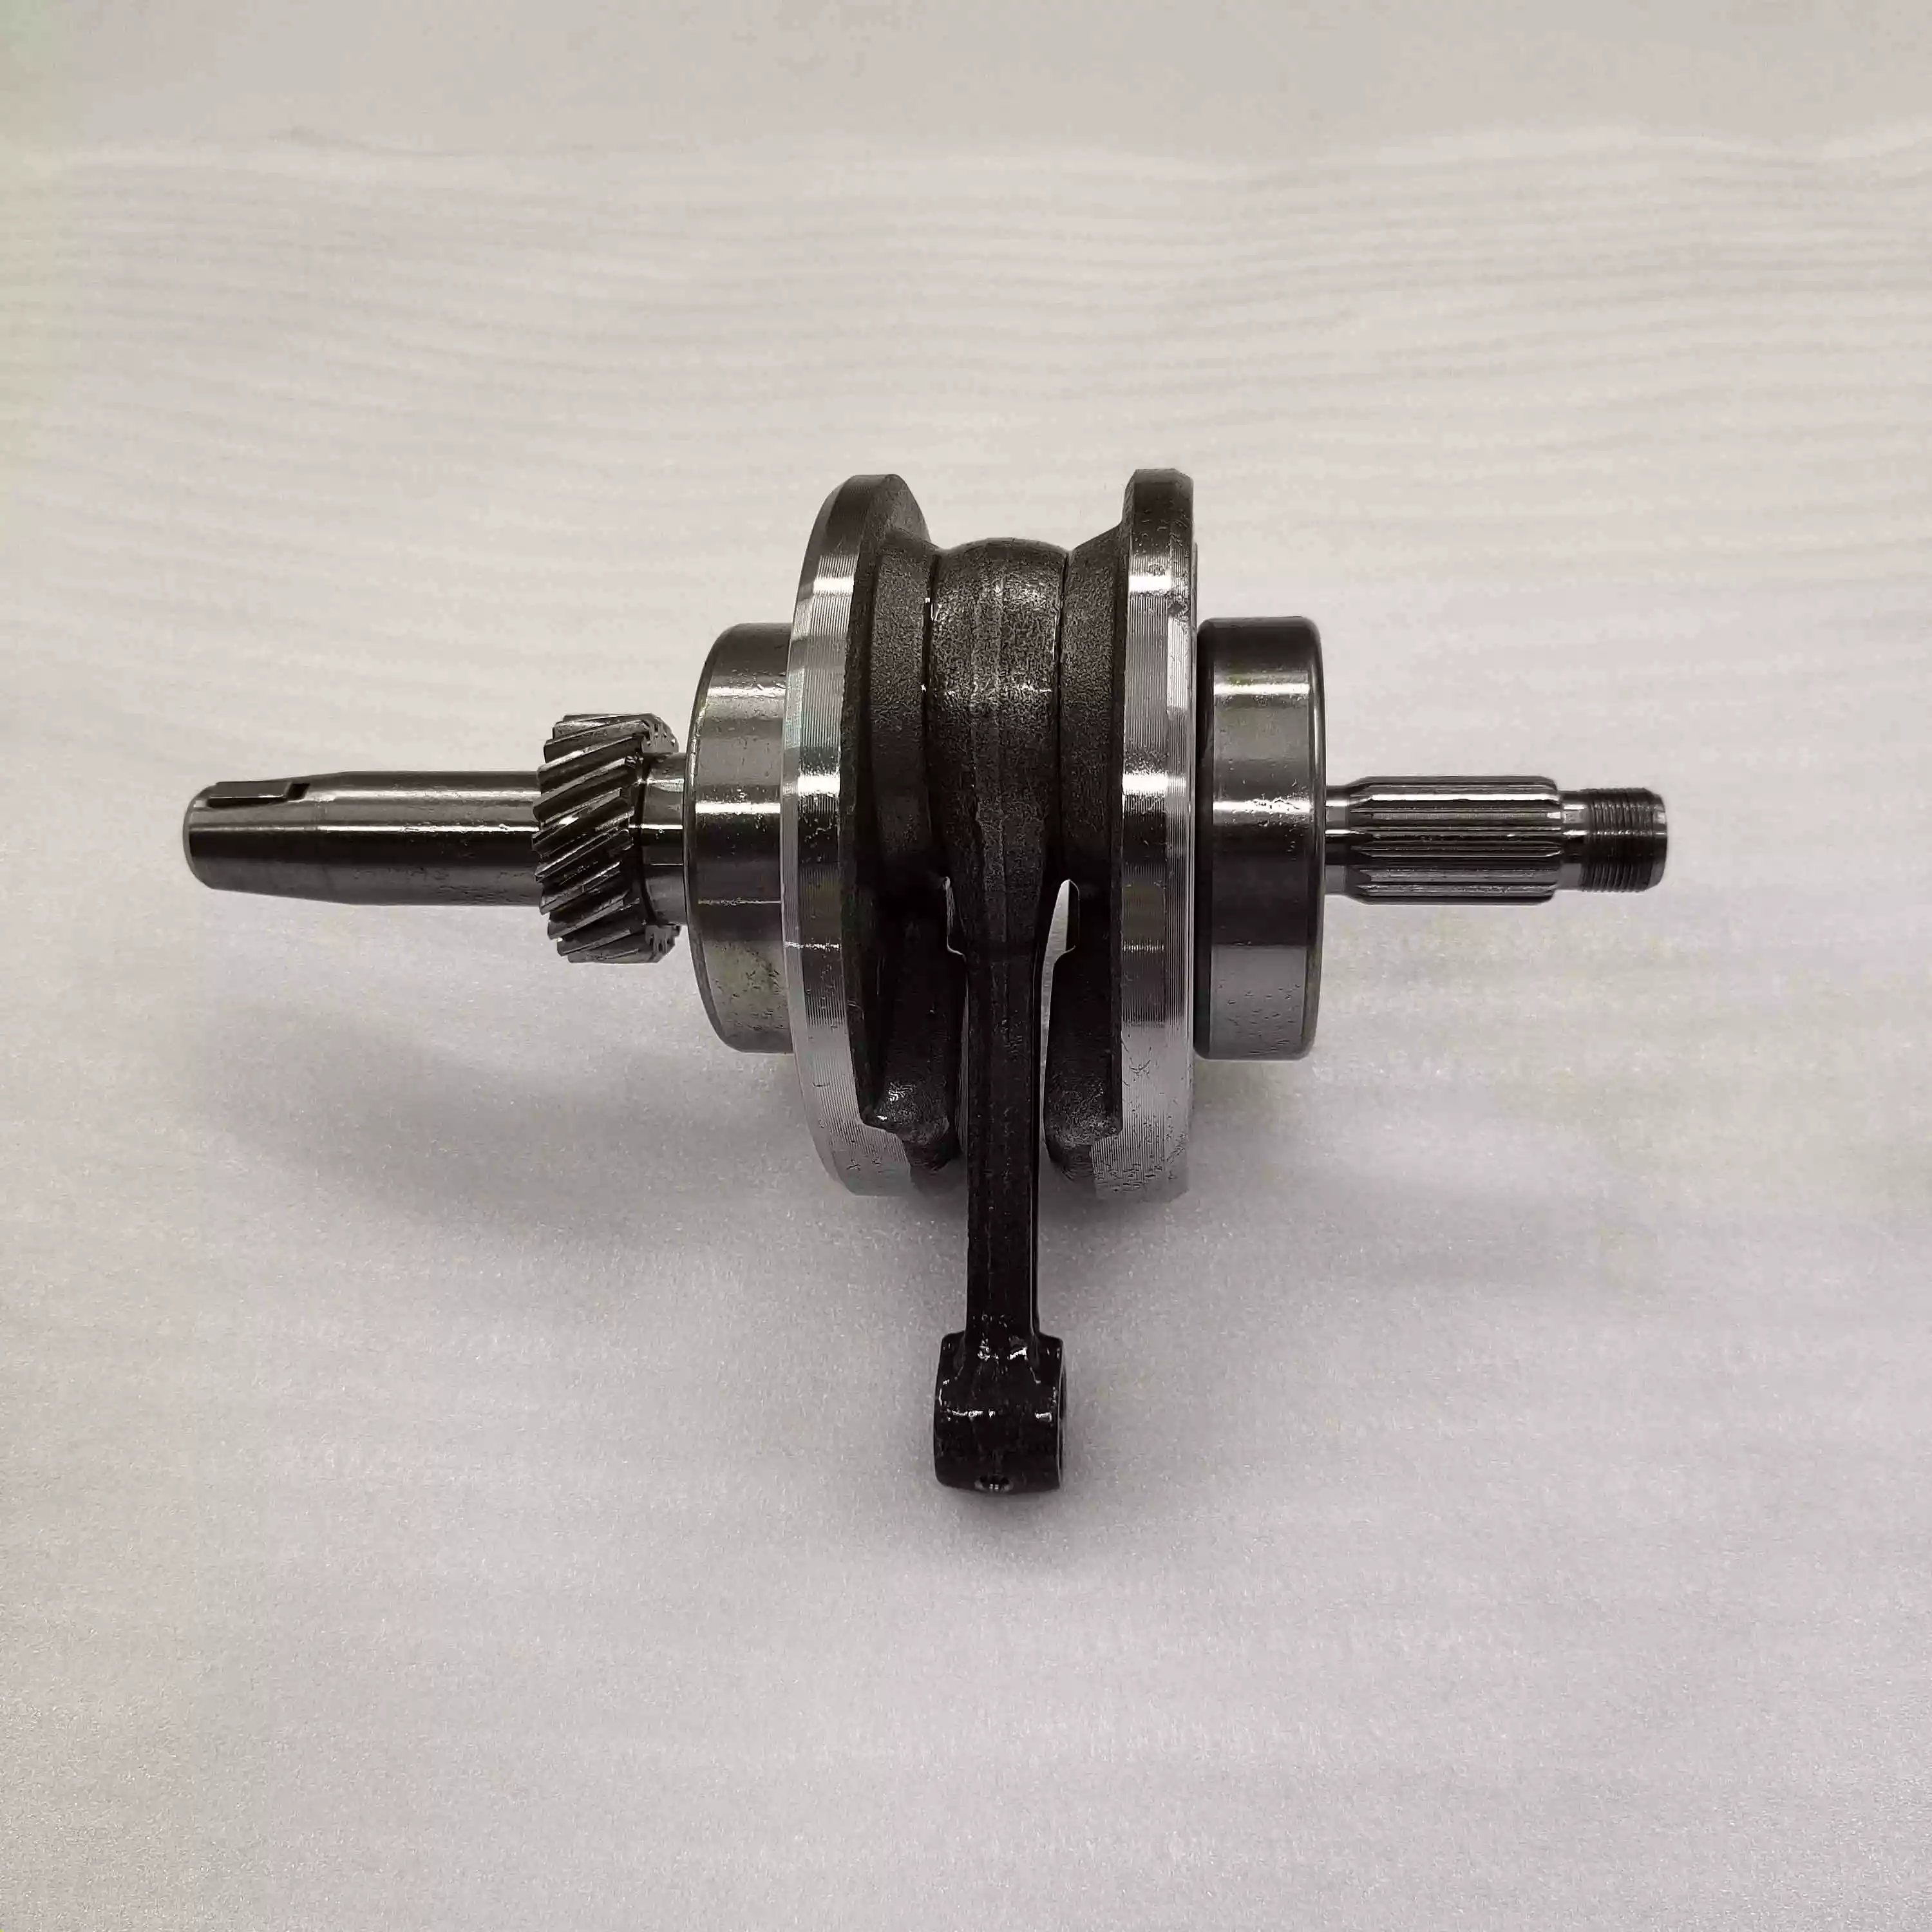 DAYANG factory new original motorcycle parts tricycle LIFAN 150cc air-cooled engine crankshaft high warranty product